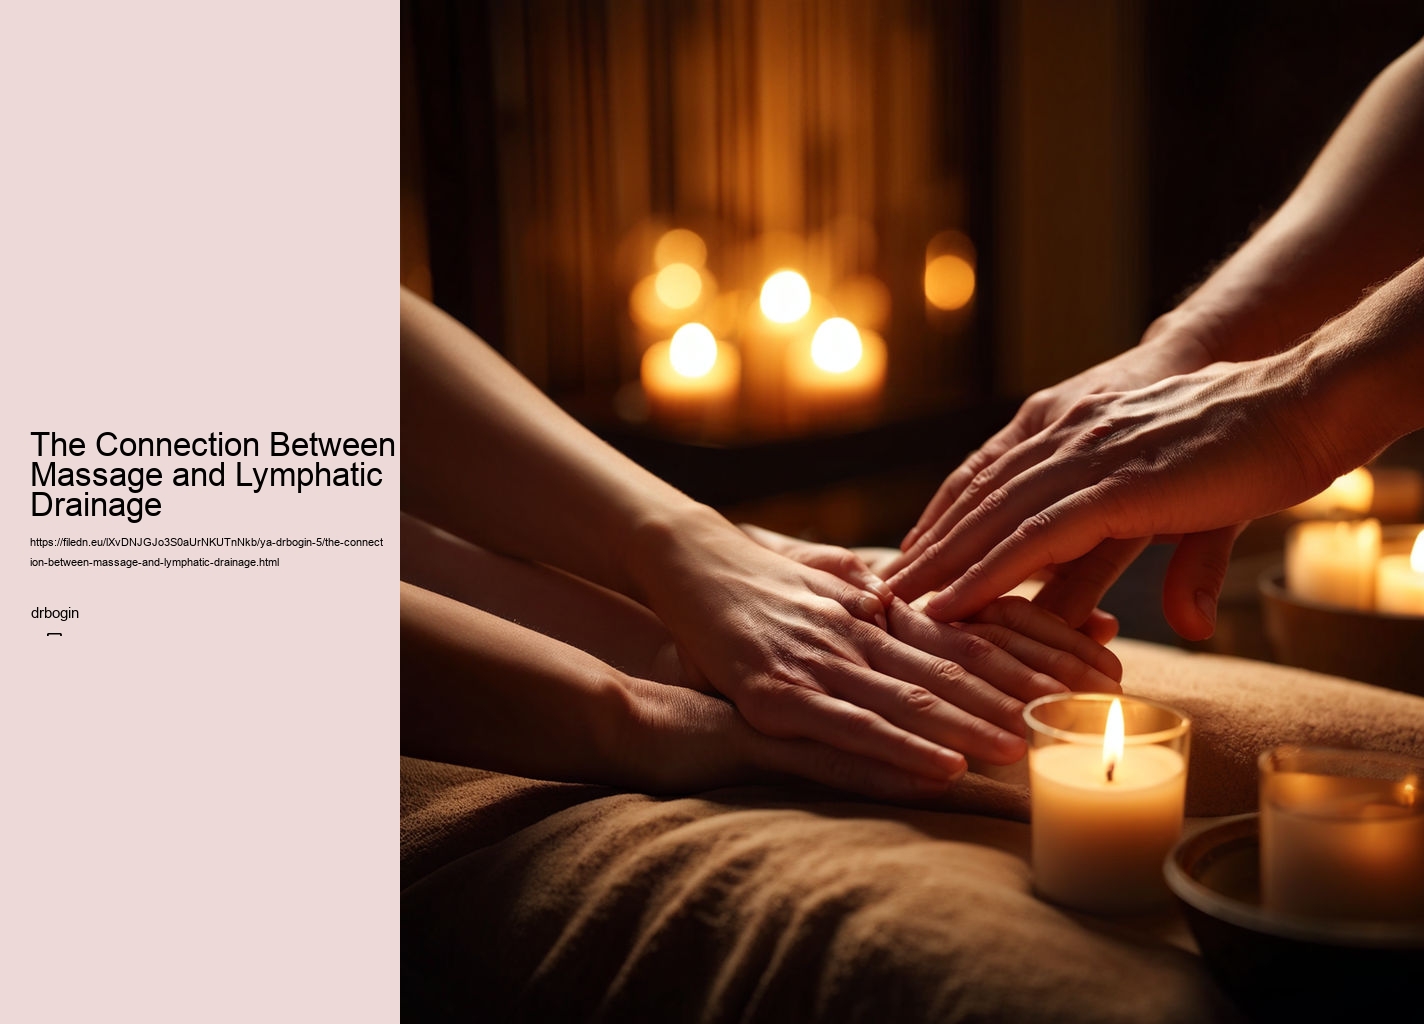 The Connection Between Massage and Lymphatic Drainage